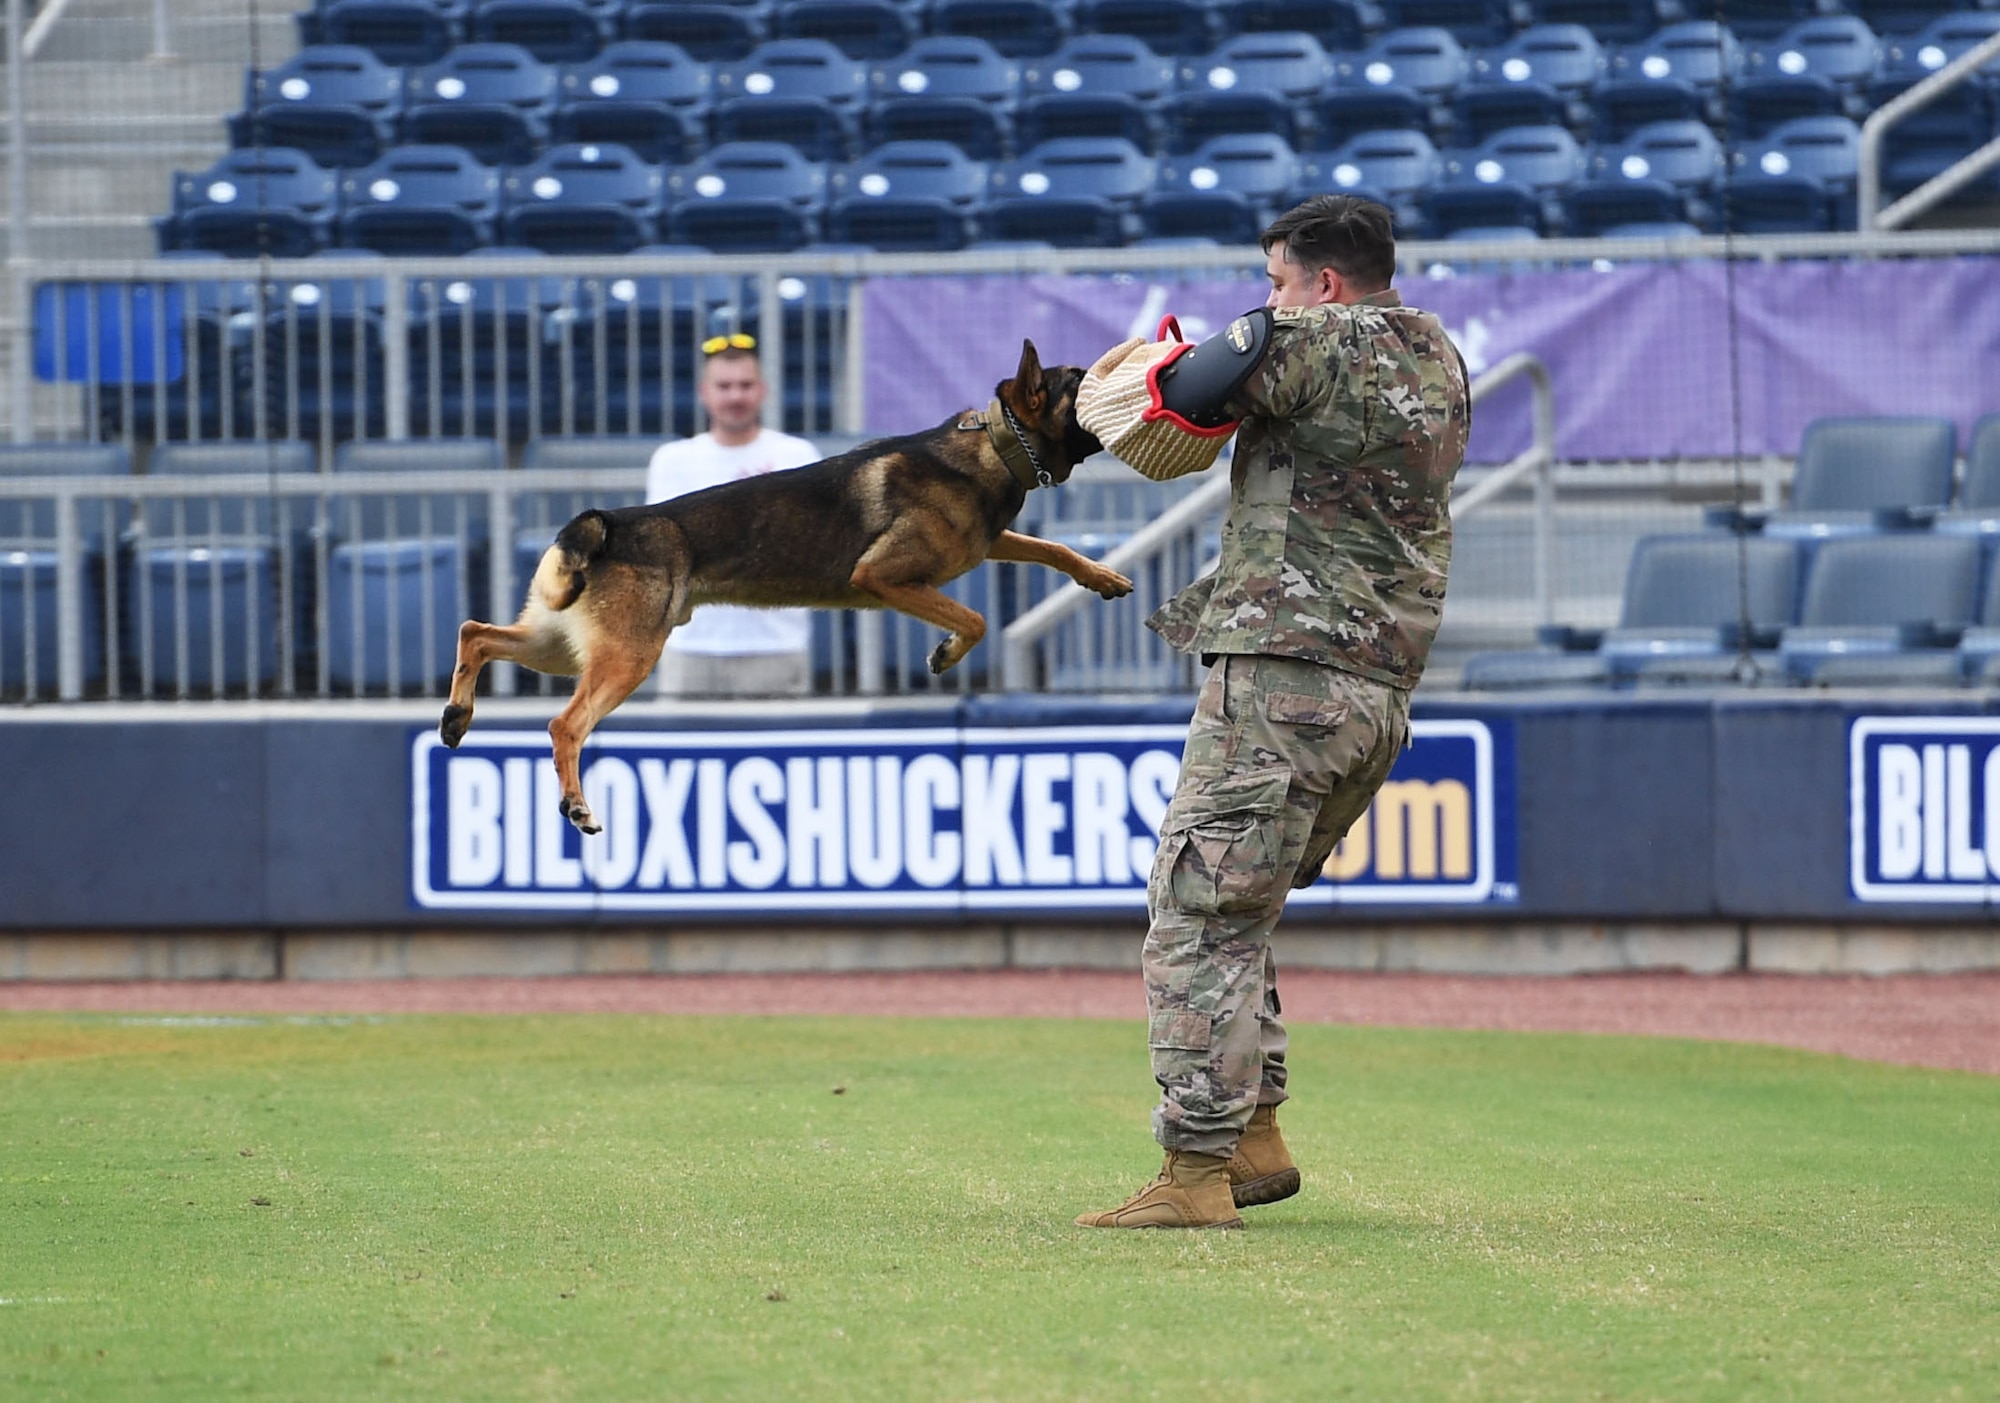 U.S. Air Force Staff Sgt. Cody Garton, 81st Security Forces Squadron military working dog handler, and Rico, 81st SFS military working dog, participate in a demonstration at the MGM Park during a Biloxi Shuckers Minor League Baseball team pre-game festivities in Biloxi, Mississippi, Aug. 1, 2021. The "Bark in the Park" themed baseball game invited fans to attend the game with their dogs. (U.S. Air Force photo by Kemberly Groue)